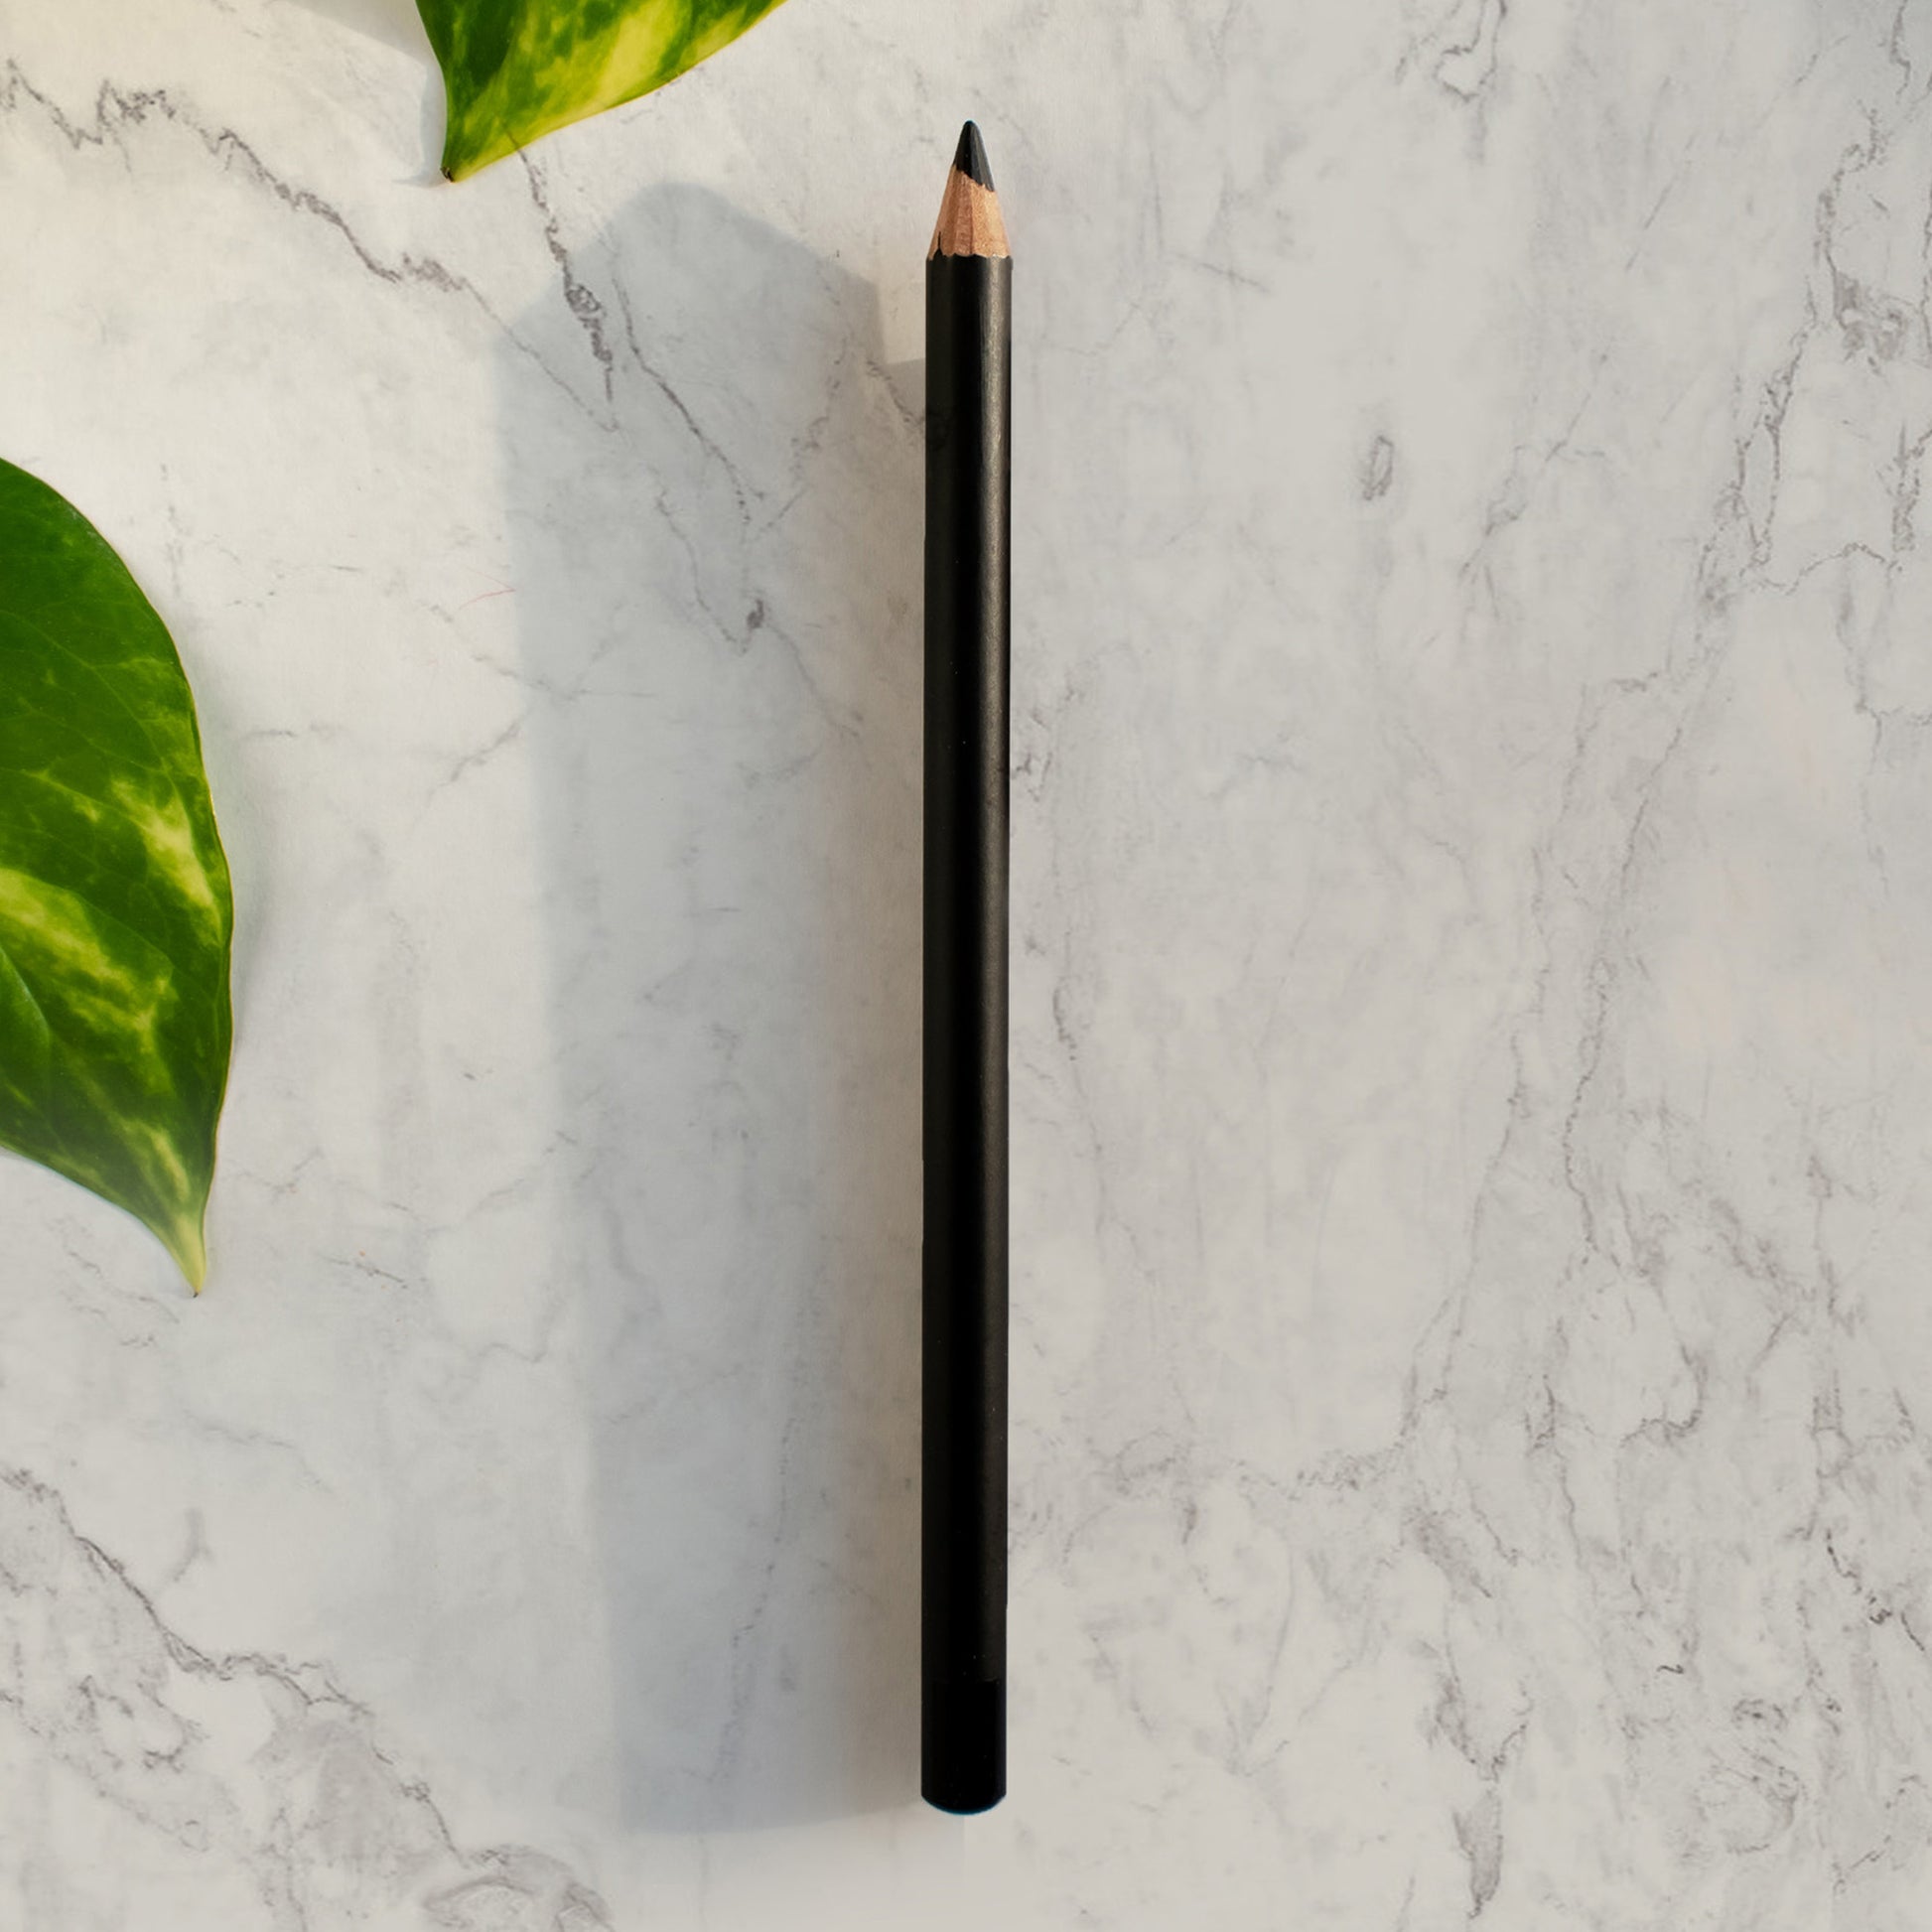 Enhance your natural beauty with Adept Eye Drama. The Cruisin Organics White Eye Pencil adds a touch of artistry to your look, allowing you to confidently express your unique style. Dare to bare-wear and be who God made you to be.